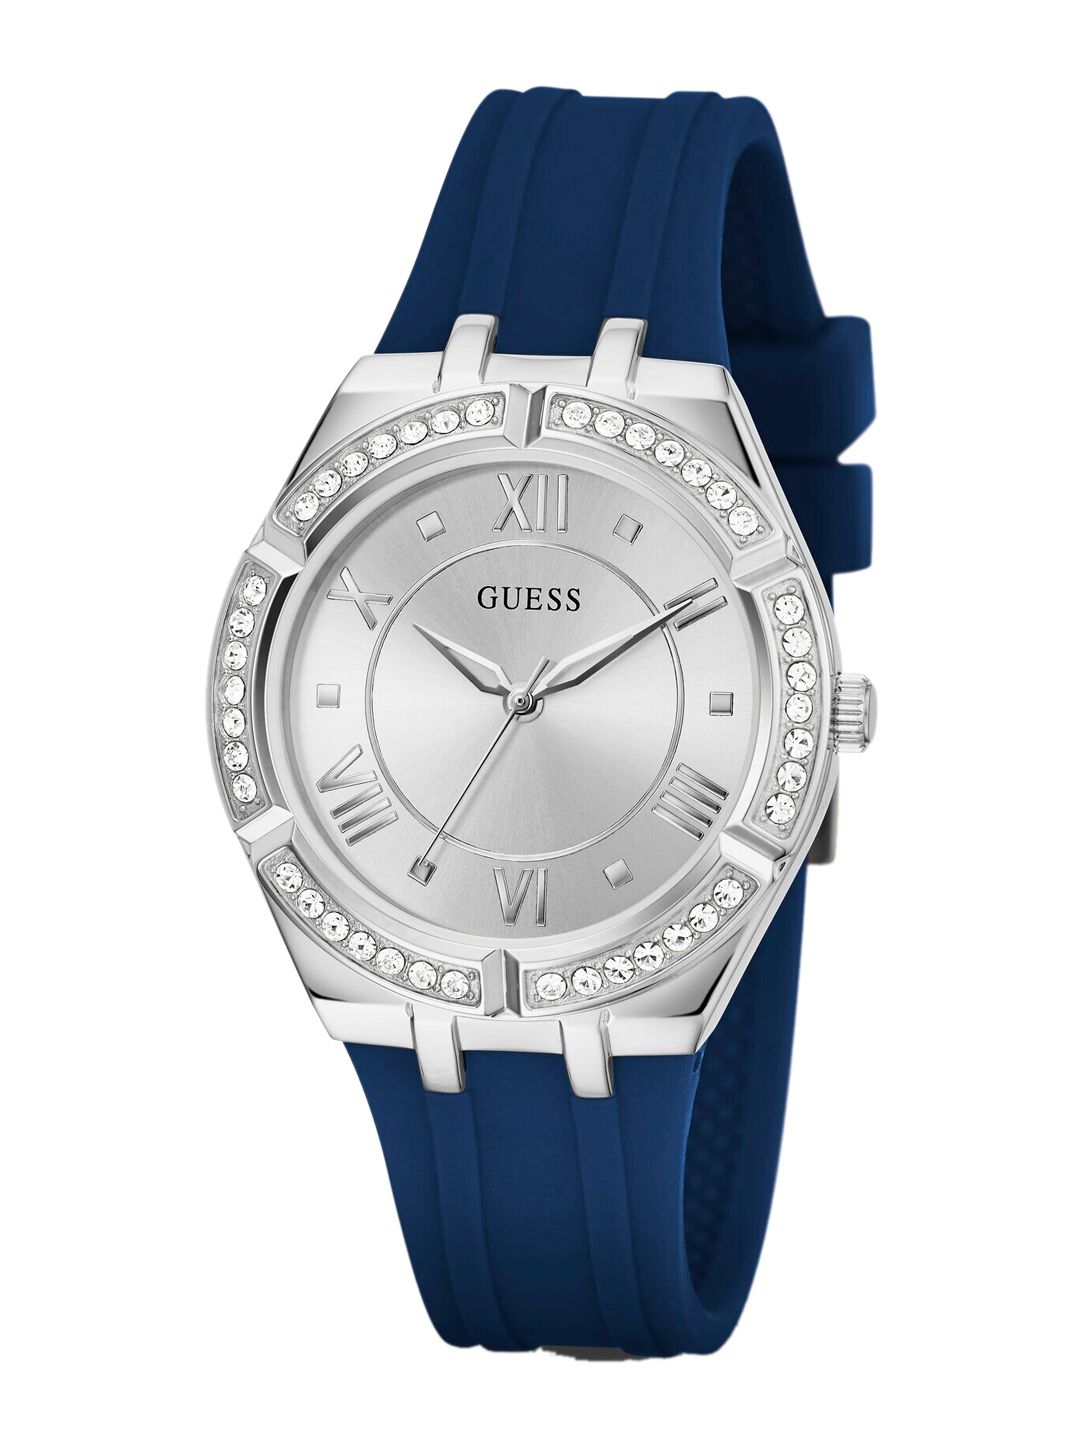 GUESS Women Silver-Toned Dial & Blue Straps Analogue Watch GW0034L5 Price in India